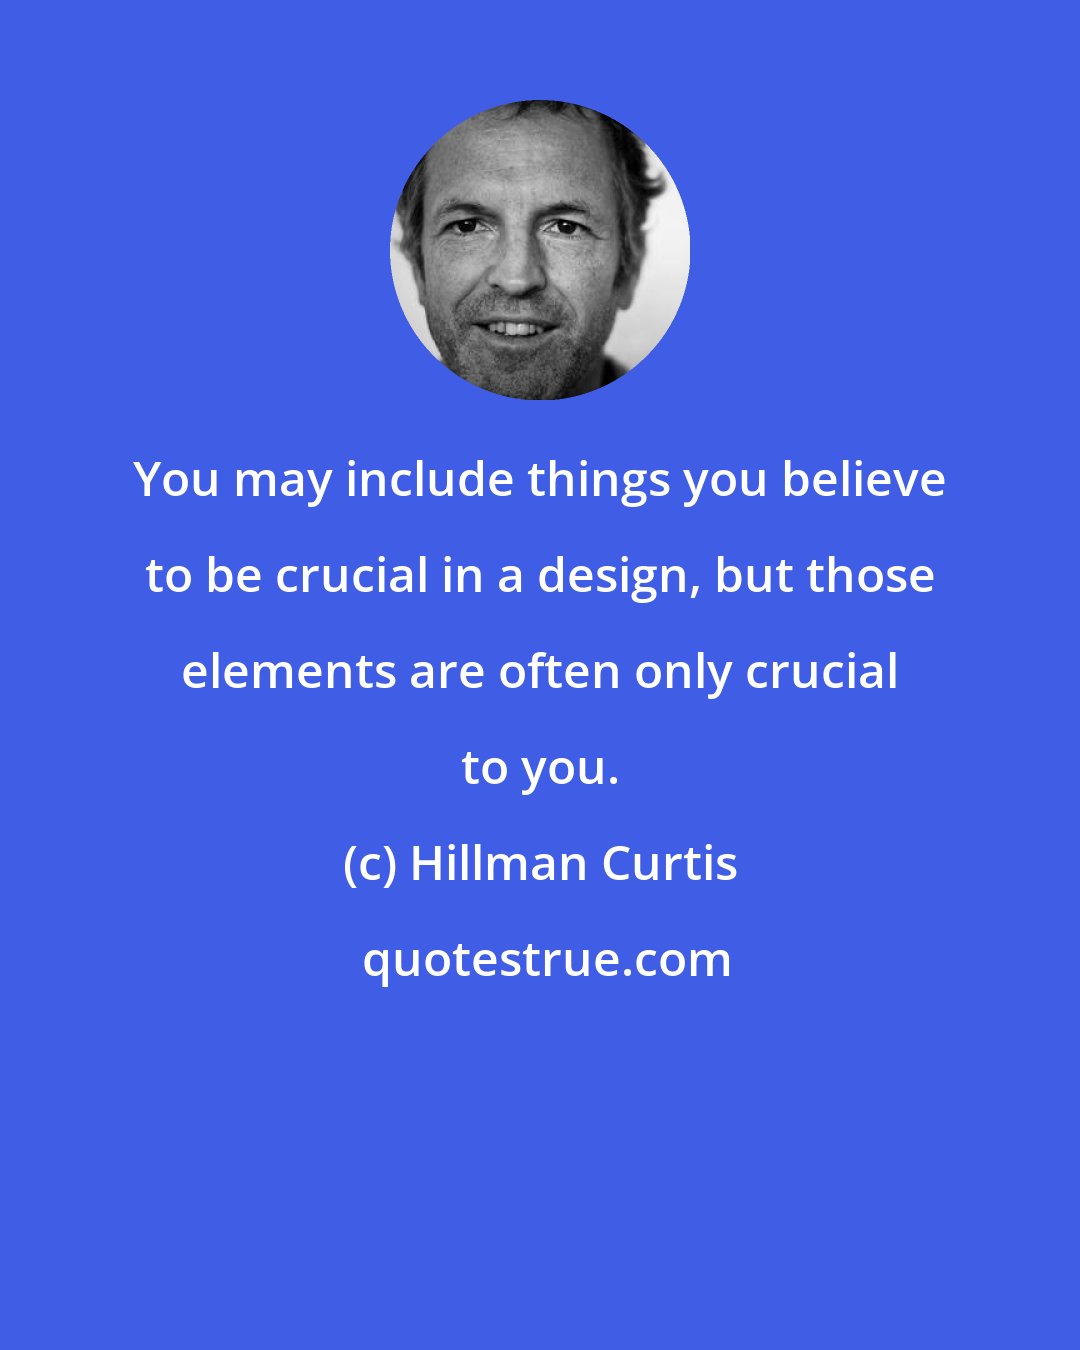 Hillman Curtis: You may include things you believe to be crucial in a design, but those elements are often only crucial to you.